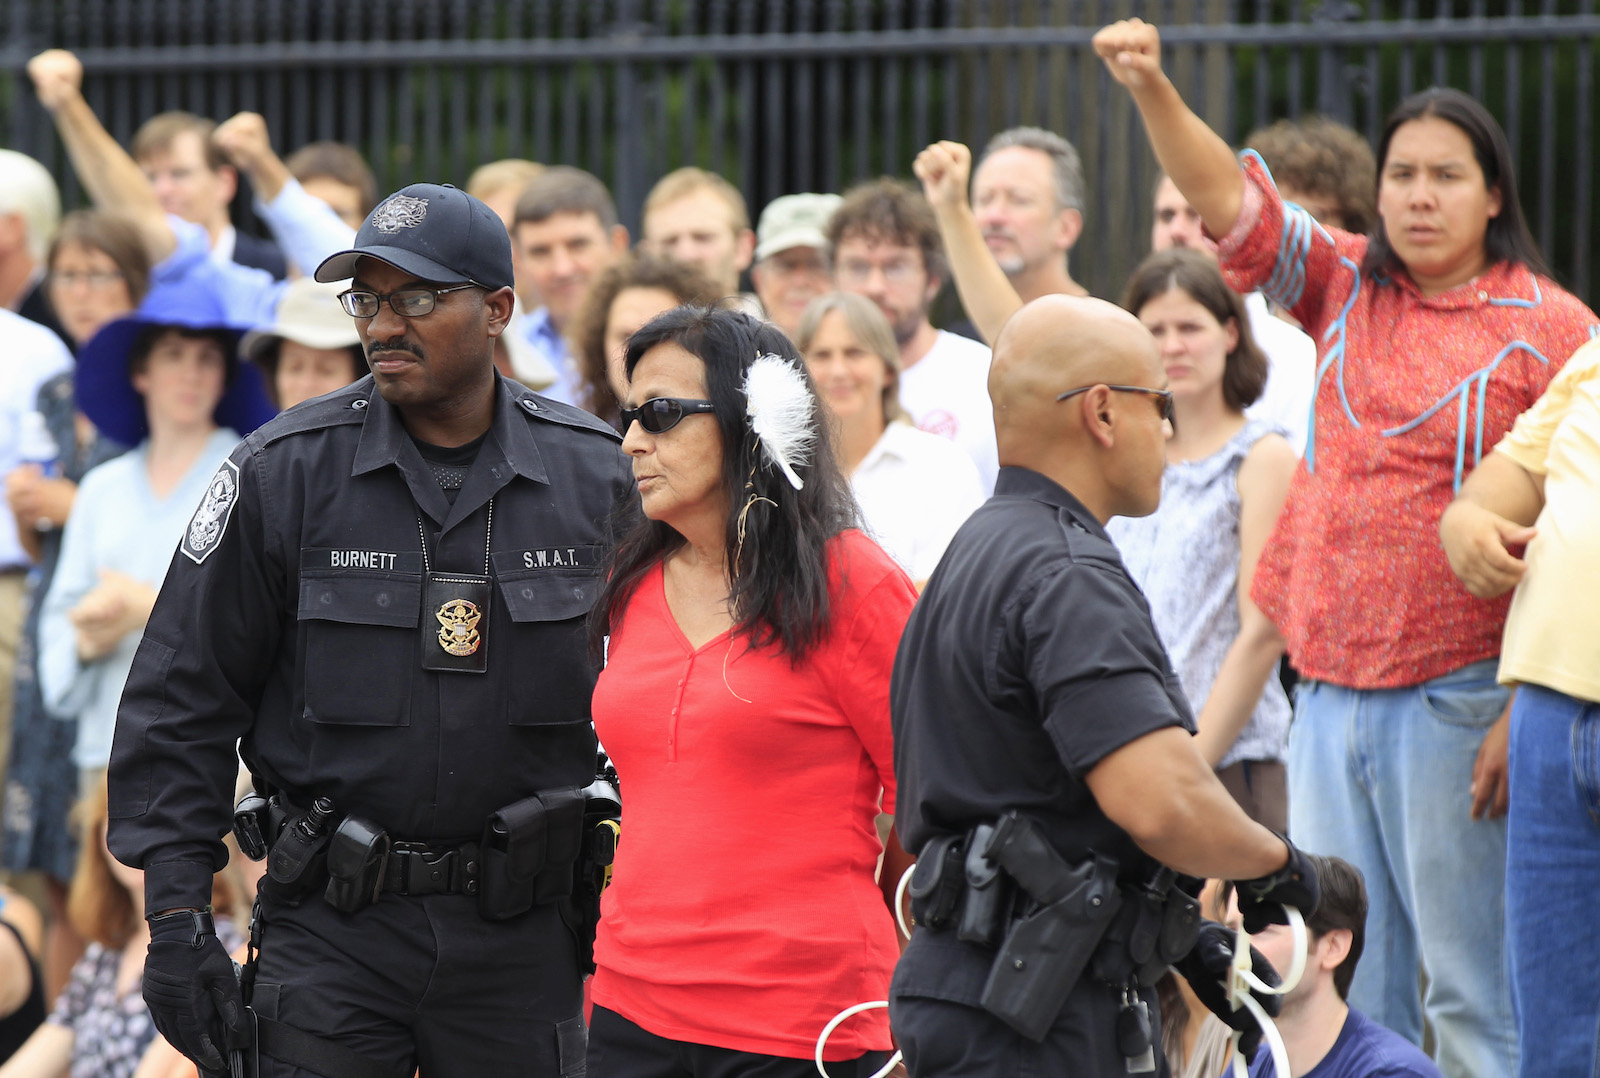 A woman in a red top and white feather in her hair is arrested in front of a crowd